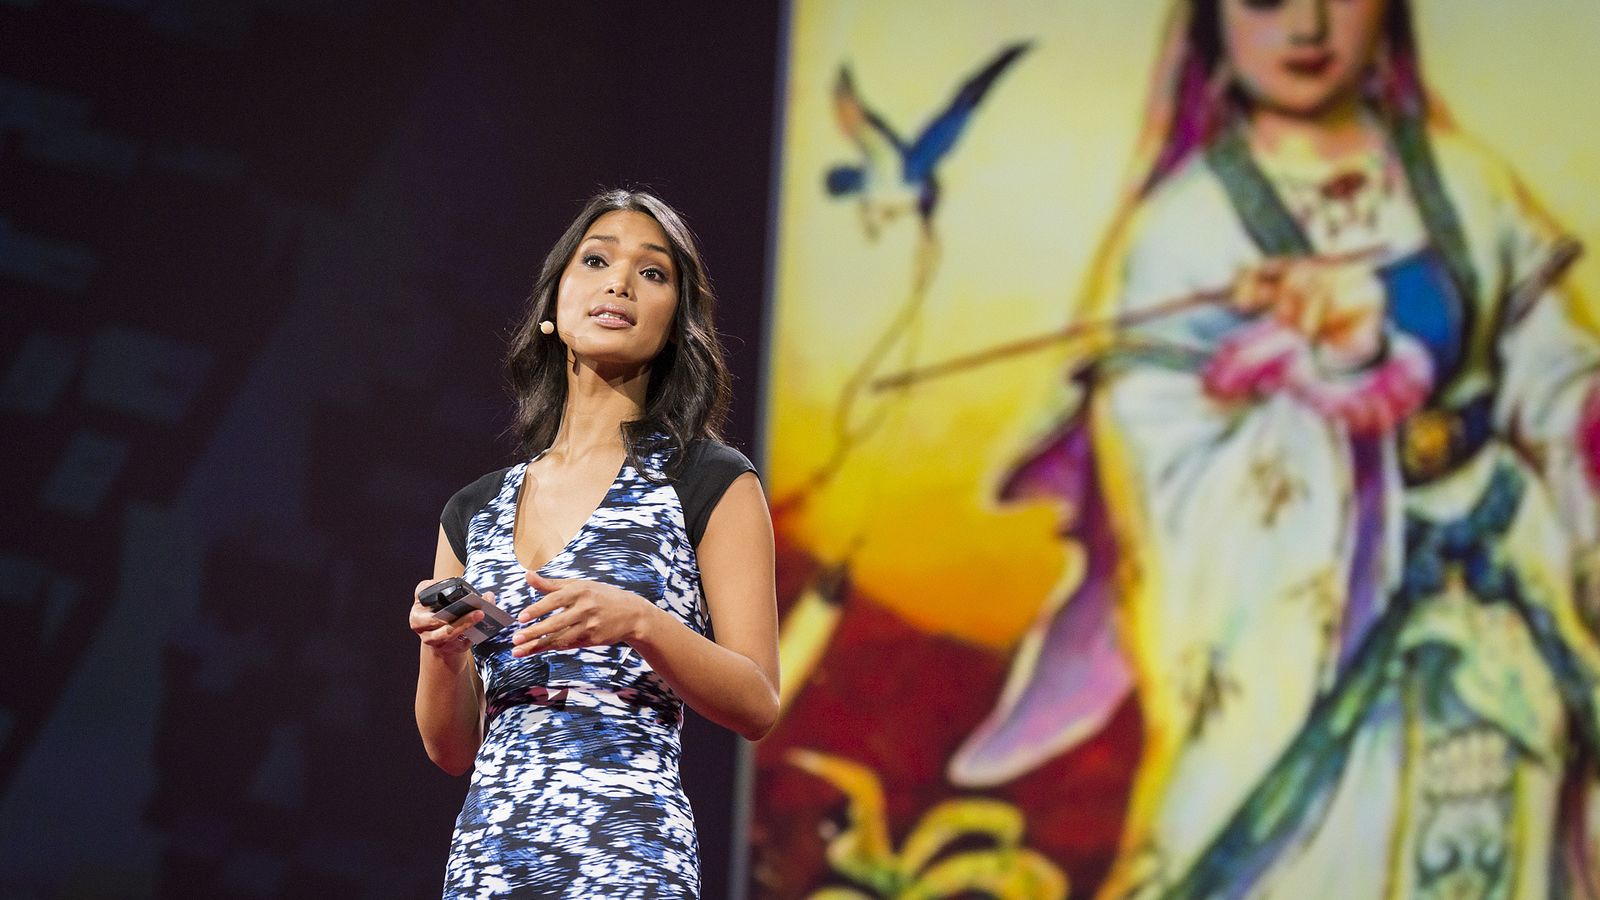 Model Geena Rocero speaks at  the TED2014 conference in Vancouver, British Columbia, earlier this month.